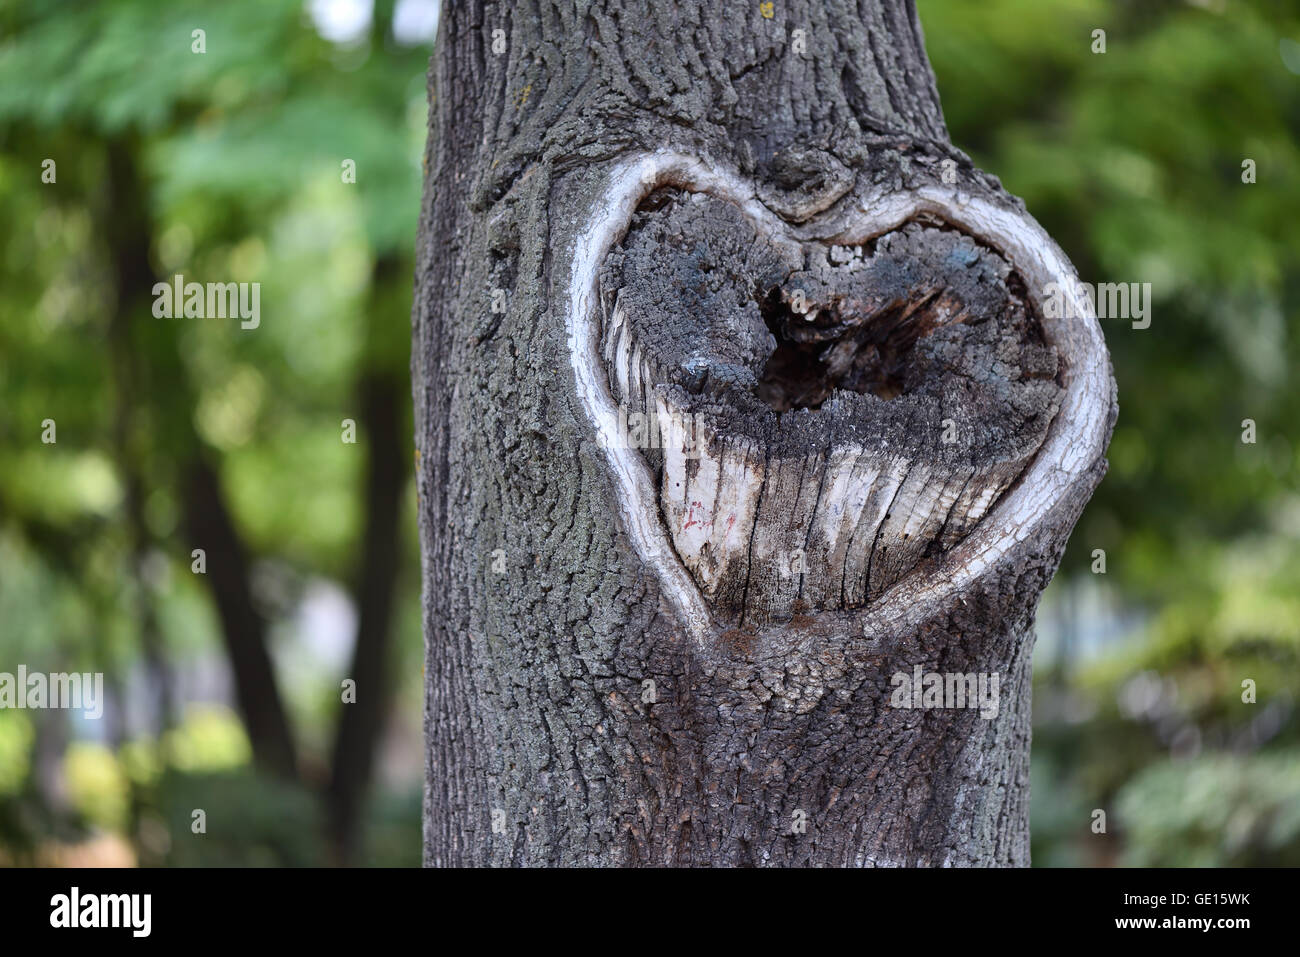 Heart shape hollow on a tree trunk, from nature with love Stock Photo